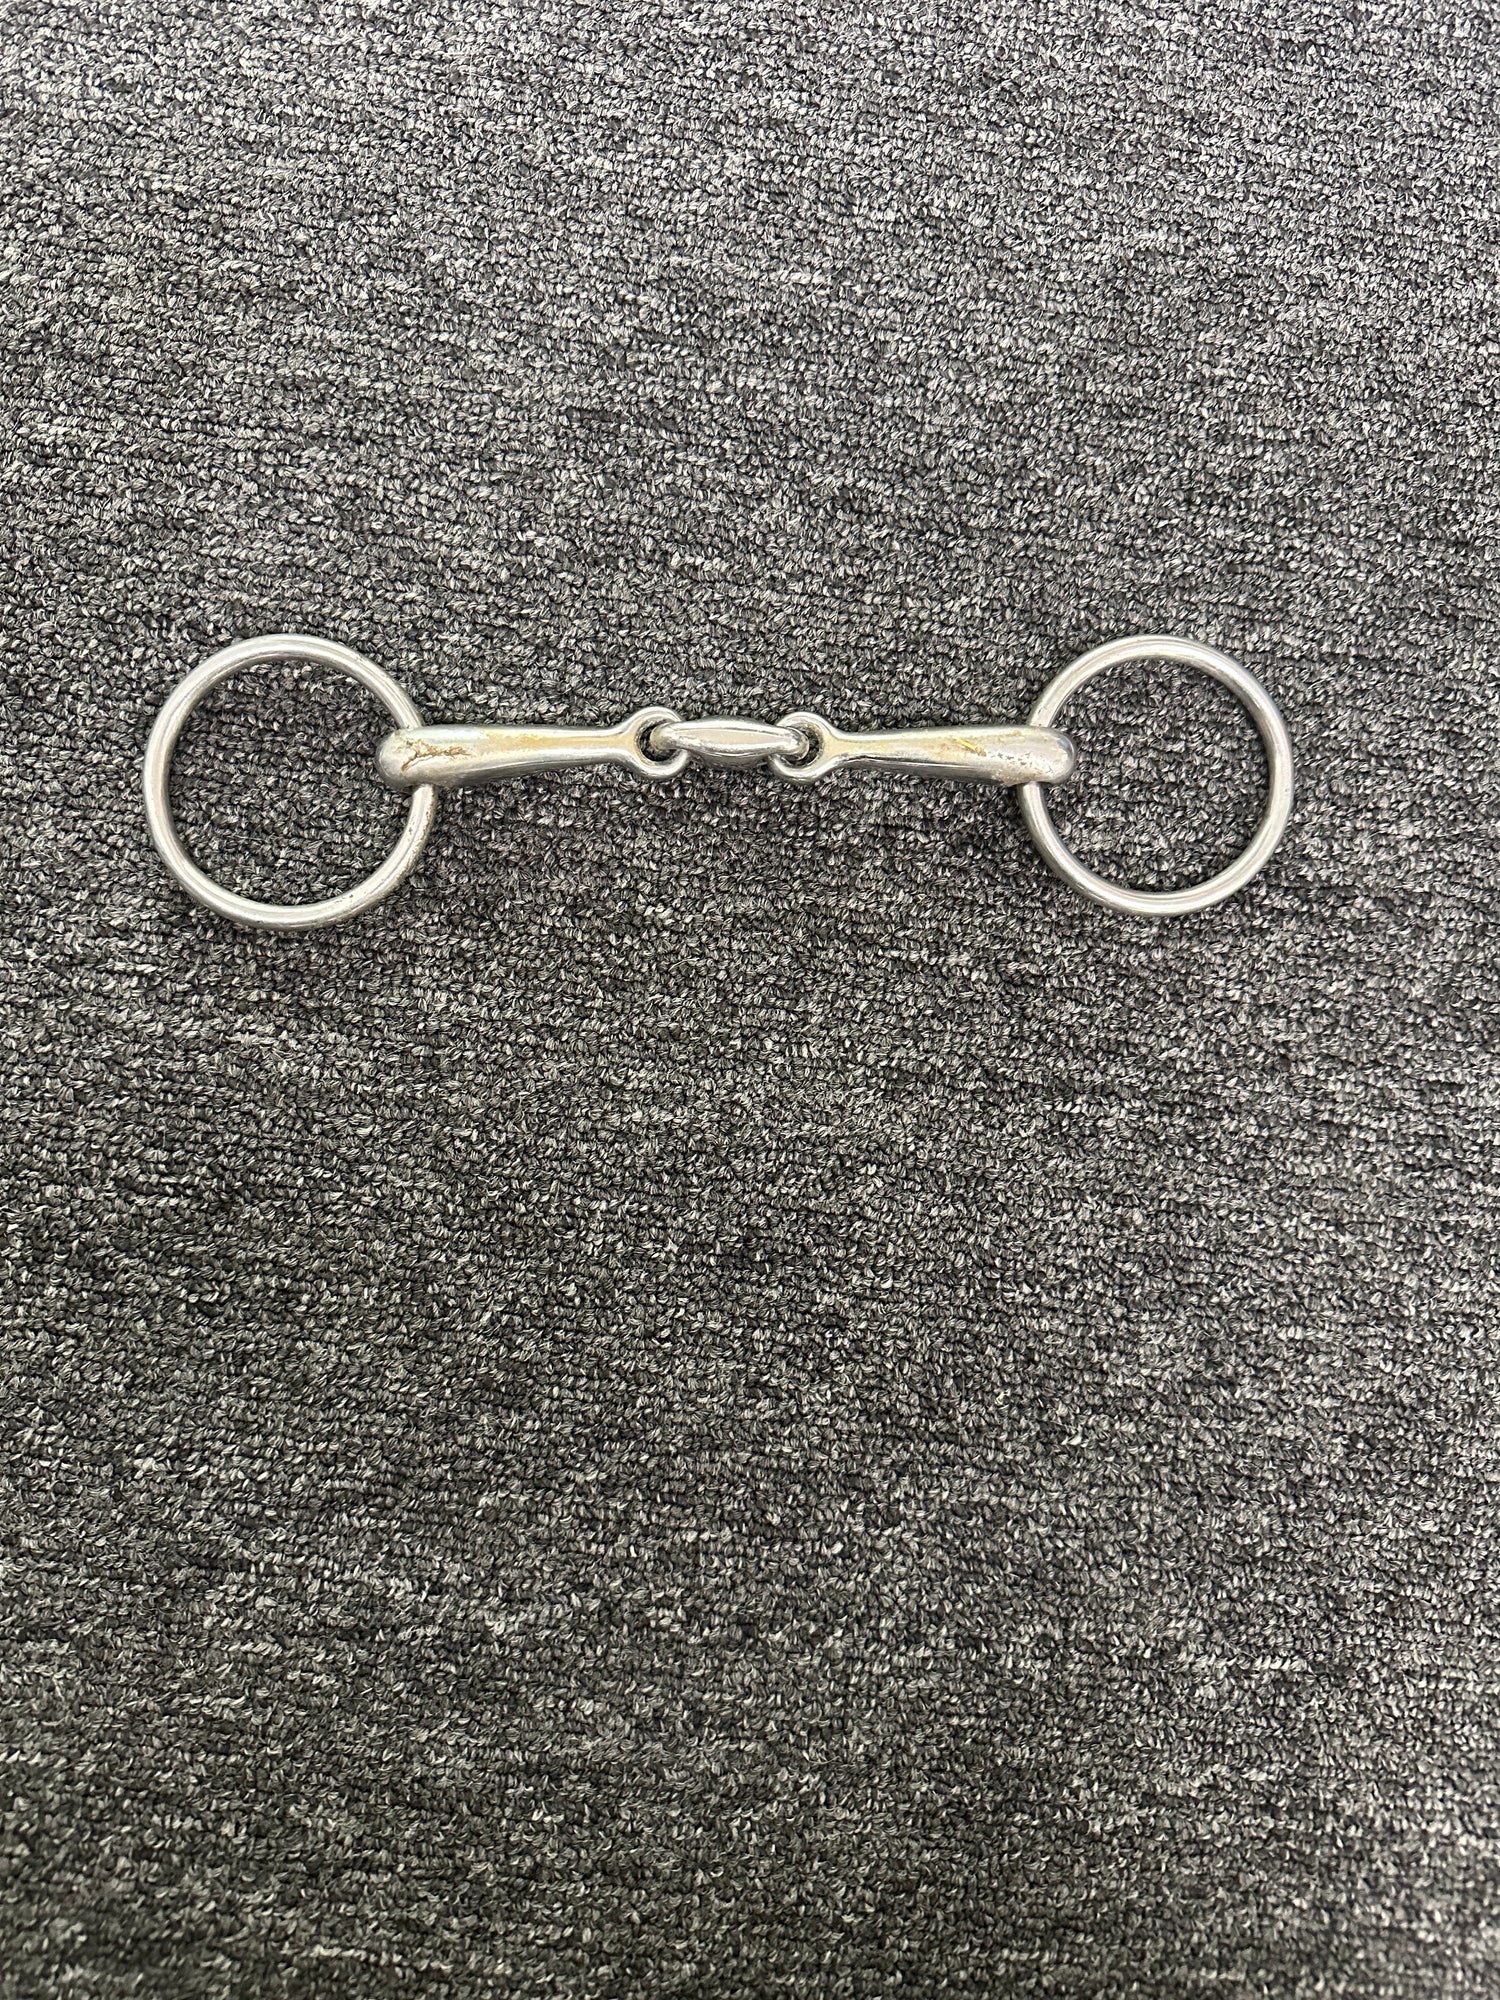 Bit - Steel French Link Loose Ring Snaffle Bit